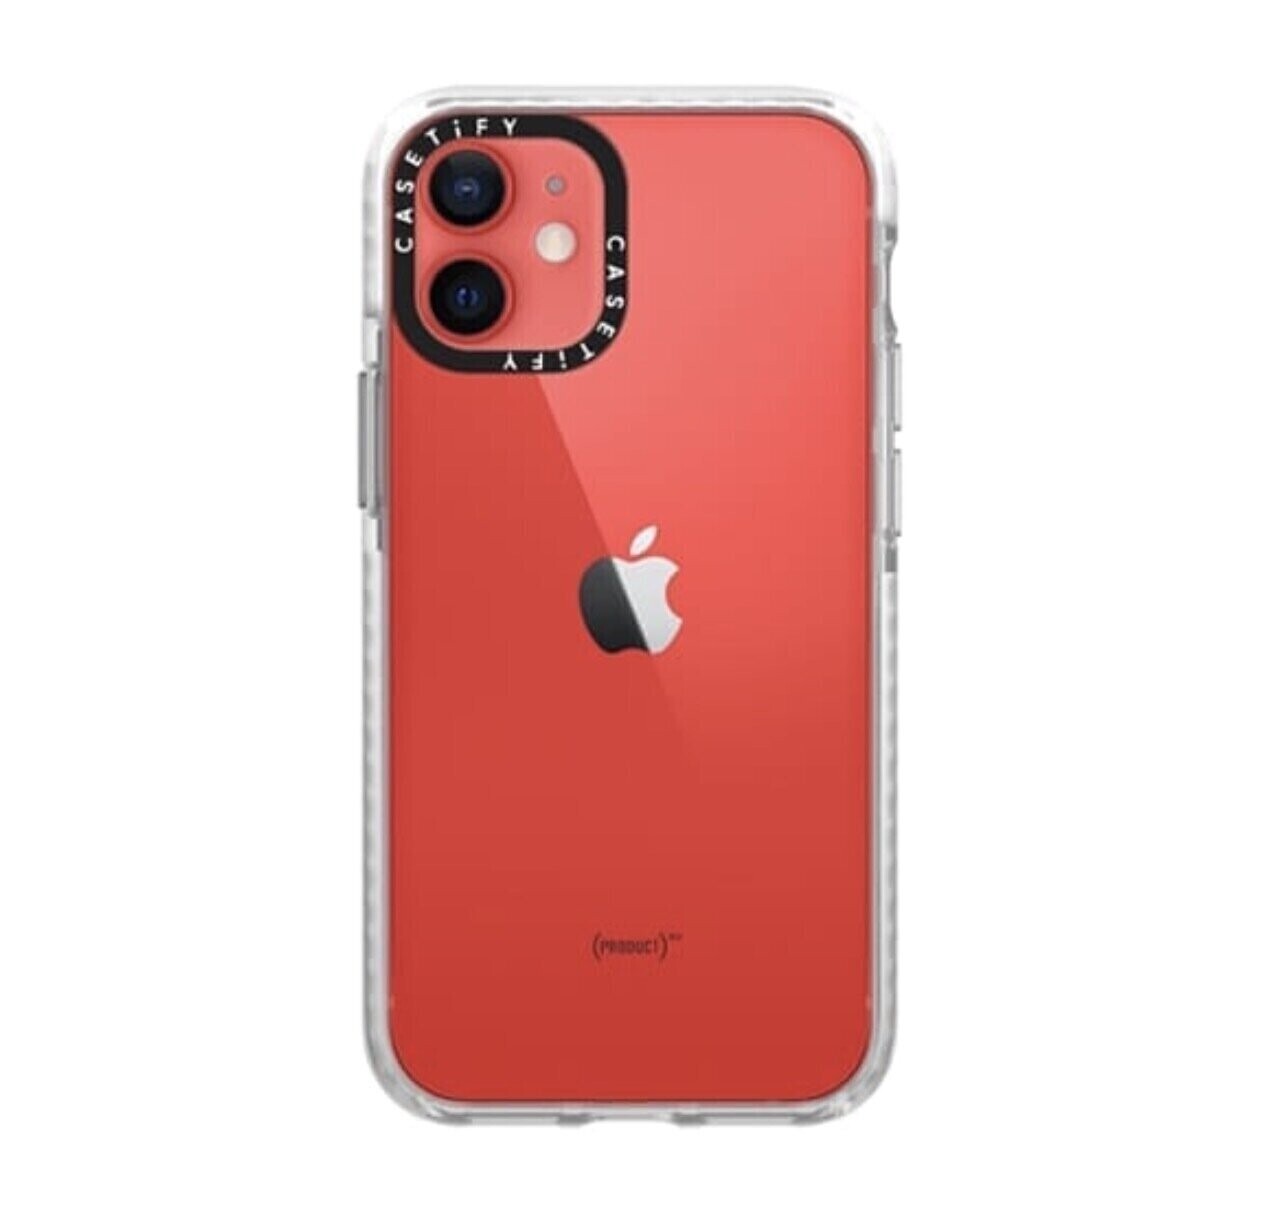 Casetify iPhone 12 mini 5.4" Impact Case, Frost